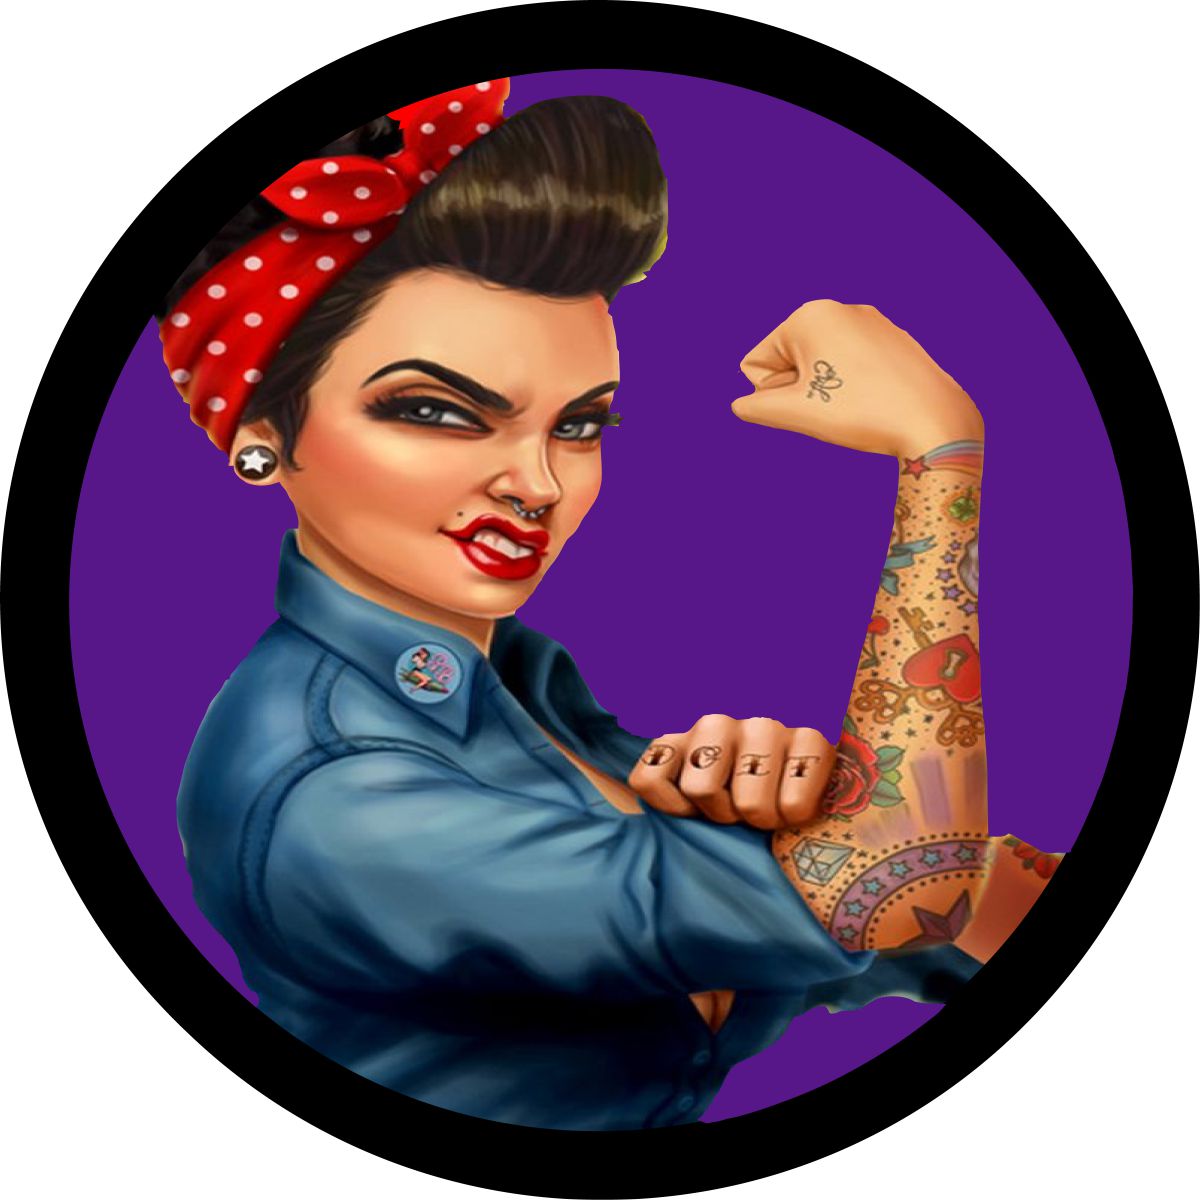 Purple background fierce tattooed Rosie the Riveter spare tire cover custom made to order for any size vehicle including spare tire cover for Jeep, camper, Bronco, RV, FJ Cruiser, trailers, and more.